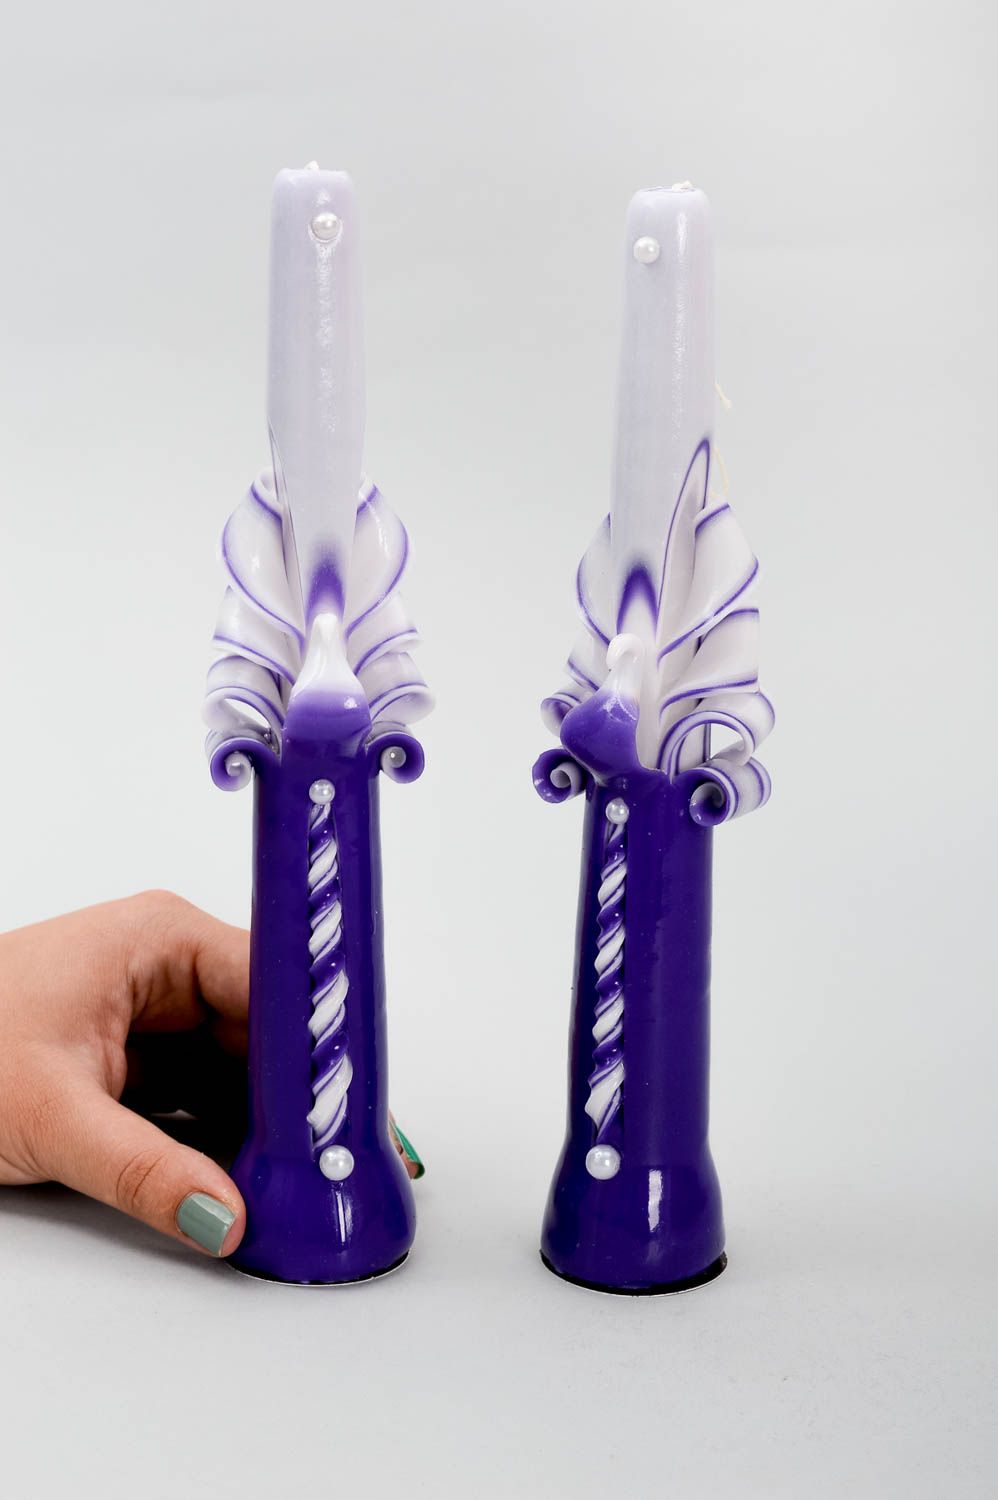 Handmade wedding candles 2 carved unusual candles cute stylish decoration photo 5